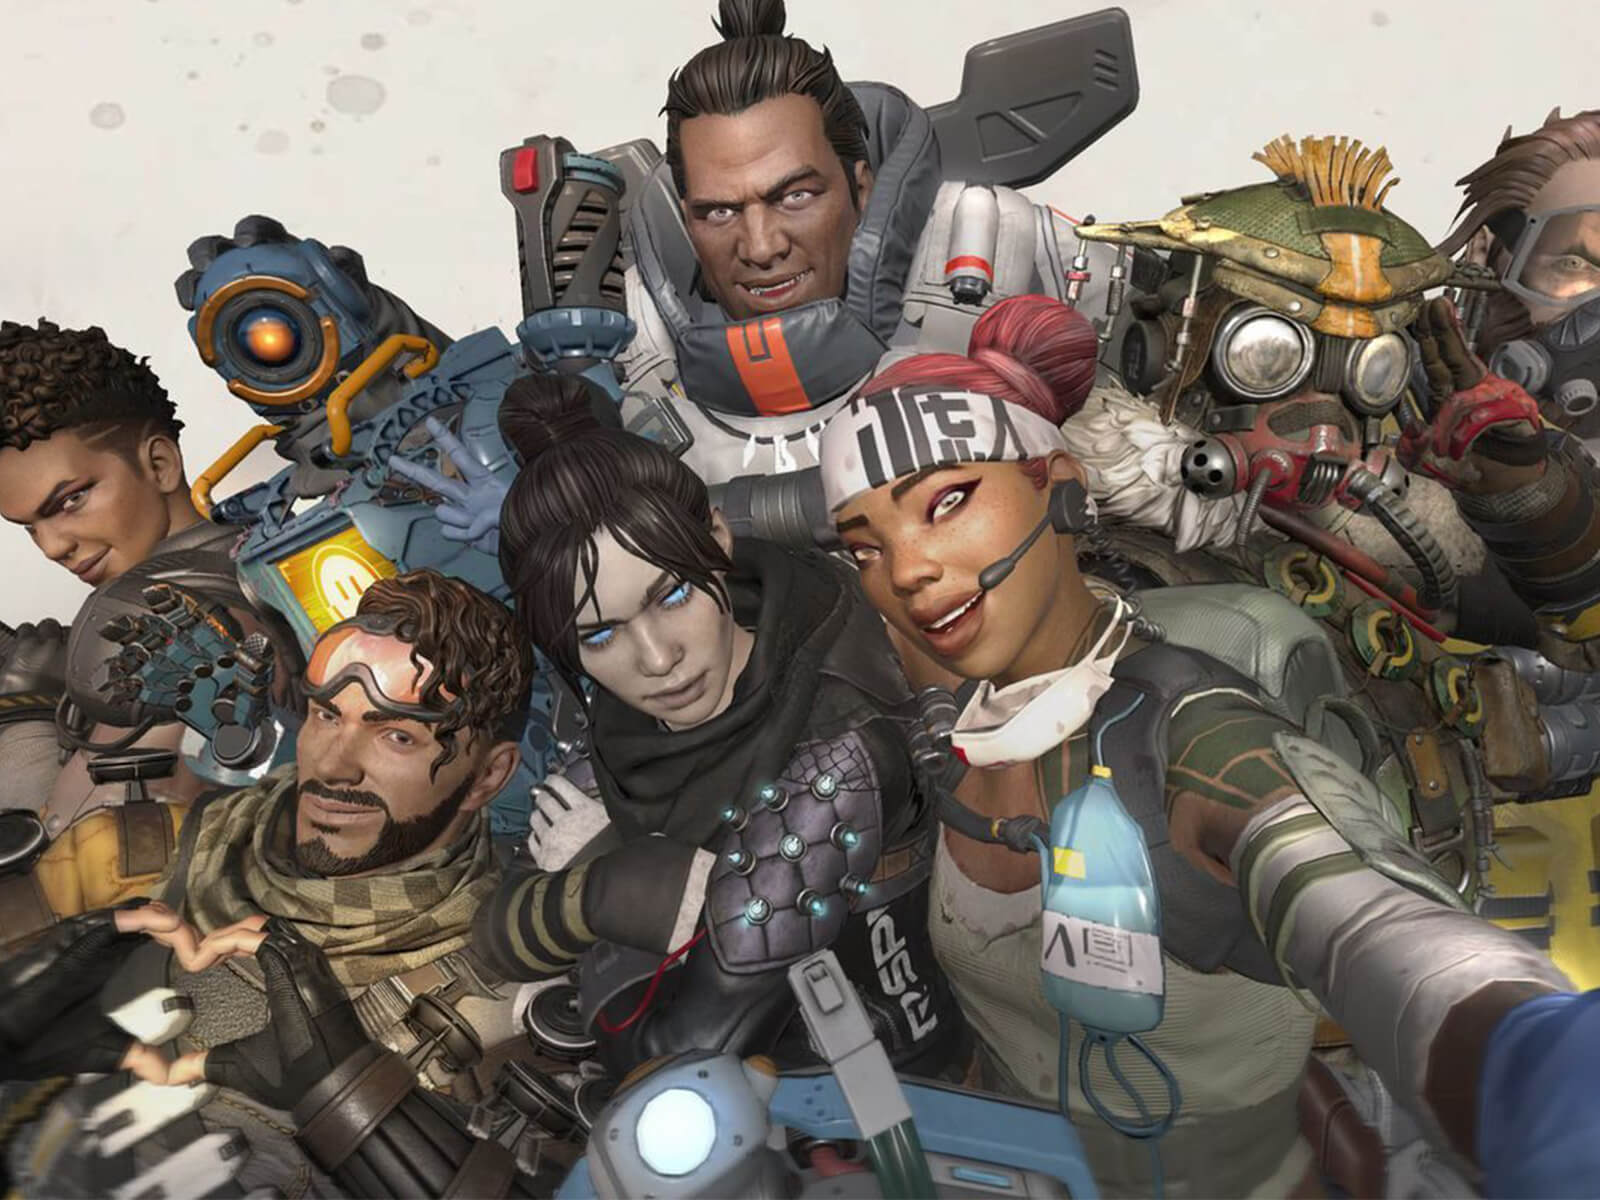 The characters from Apex Legends pose for a selfie.